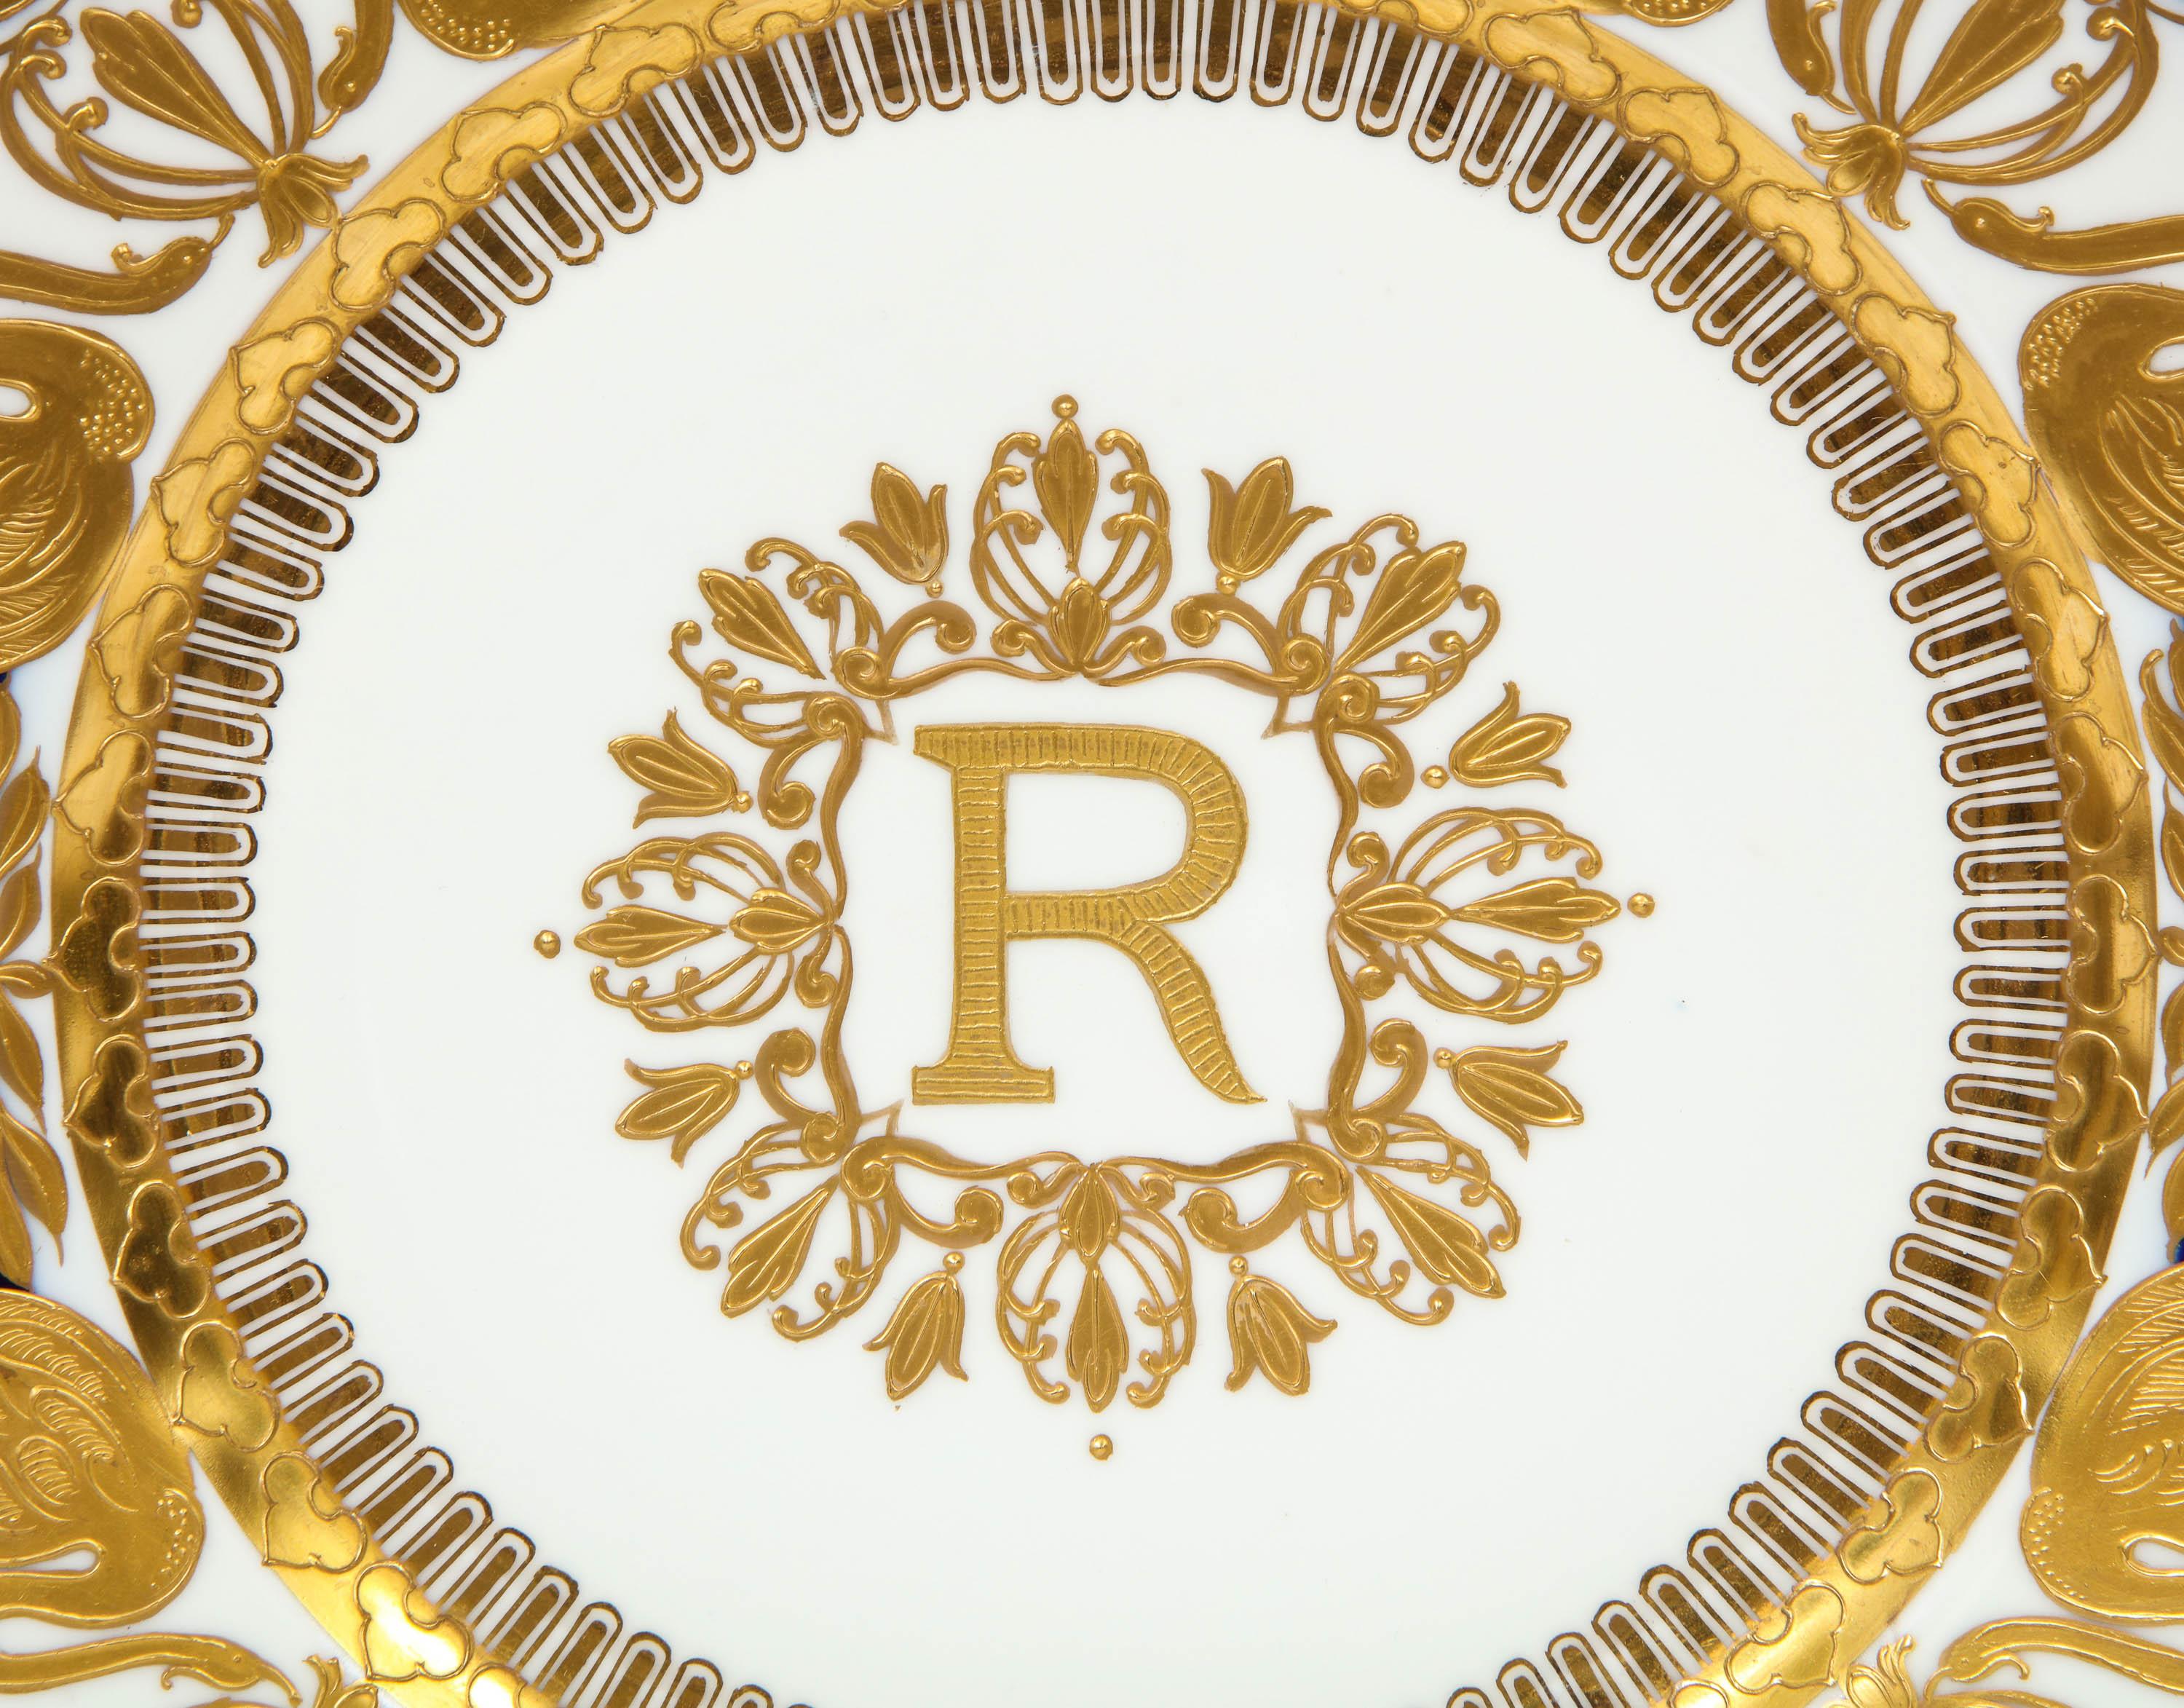 Exquisite Set of 12 Sevres Porcelain Royal Dinner Plates with 